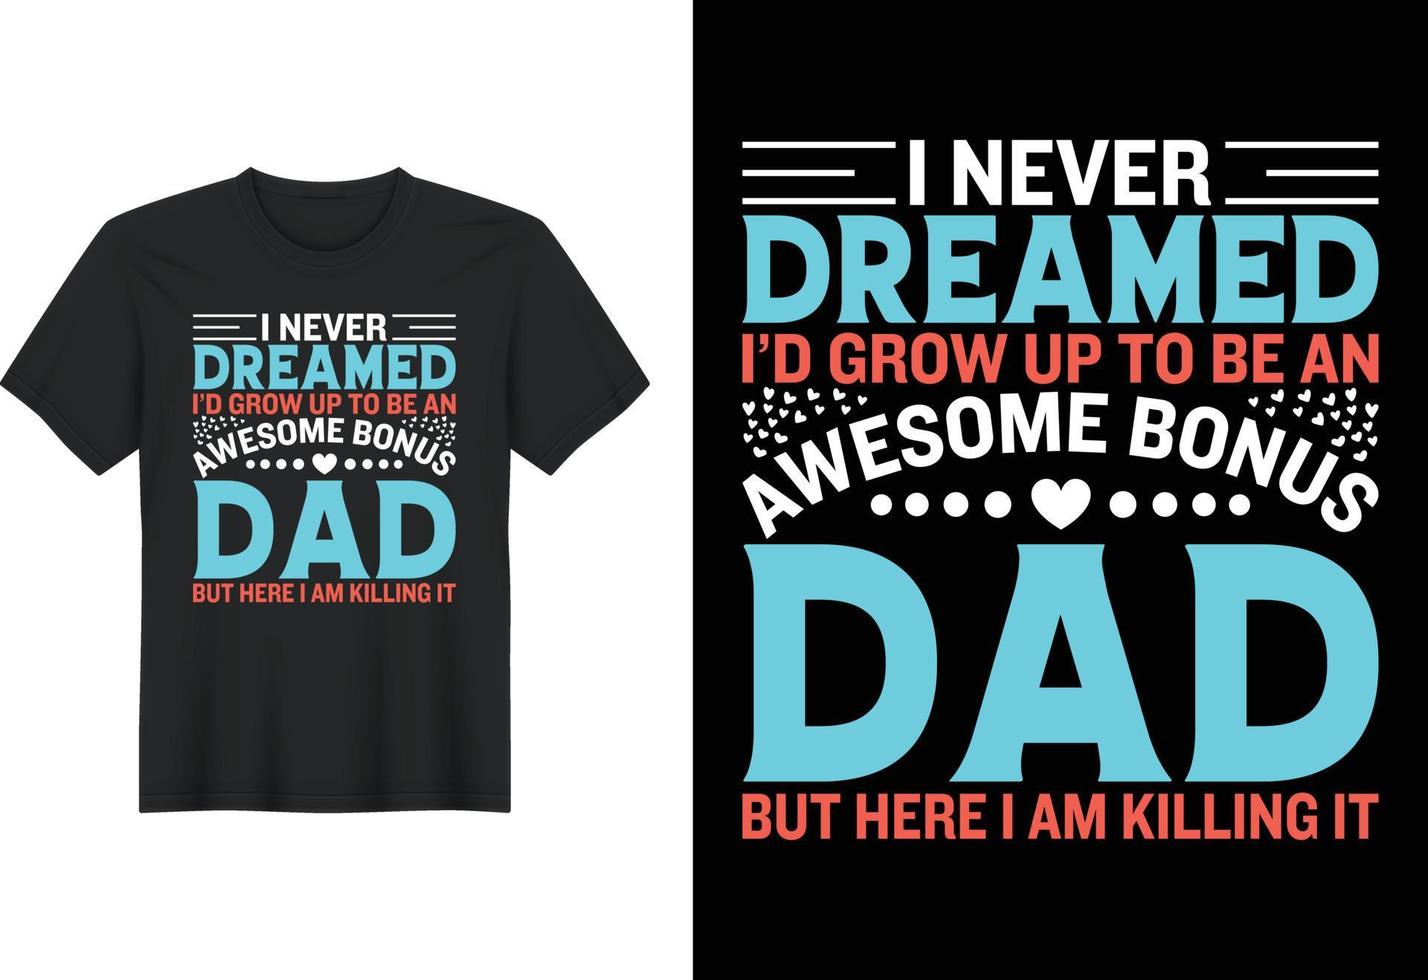 I Never Dreamed I'd Grow Up To Be An Awesome Bonus Dad But Here I Am Killing It, T Shirt Design, Father's Day T-Shirt Design vector